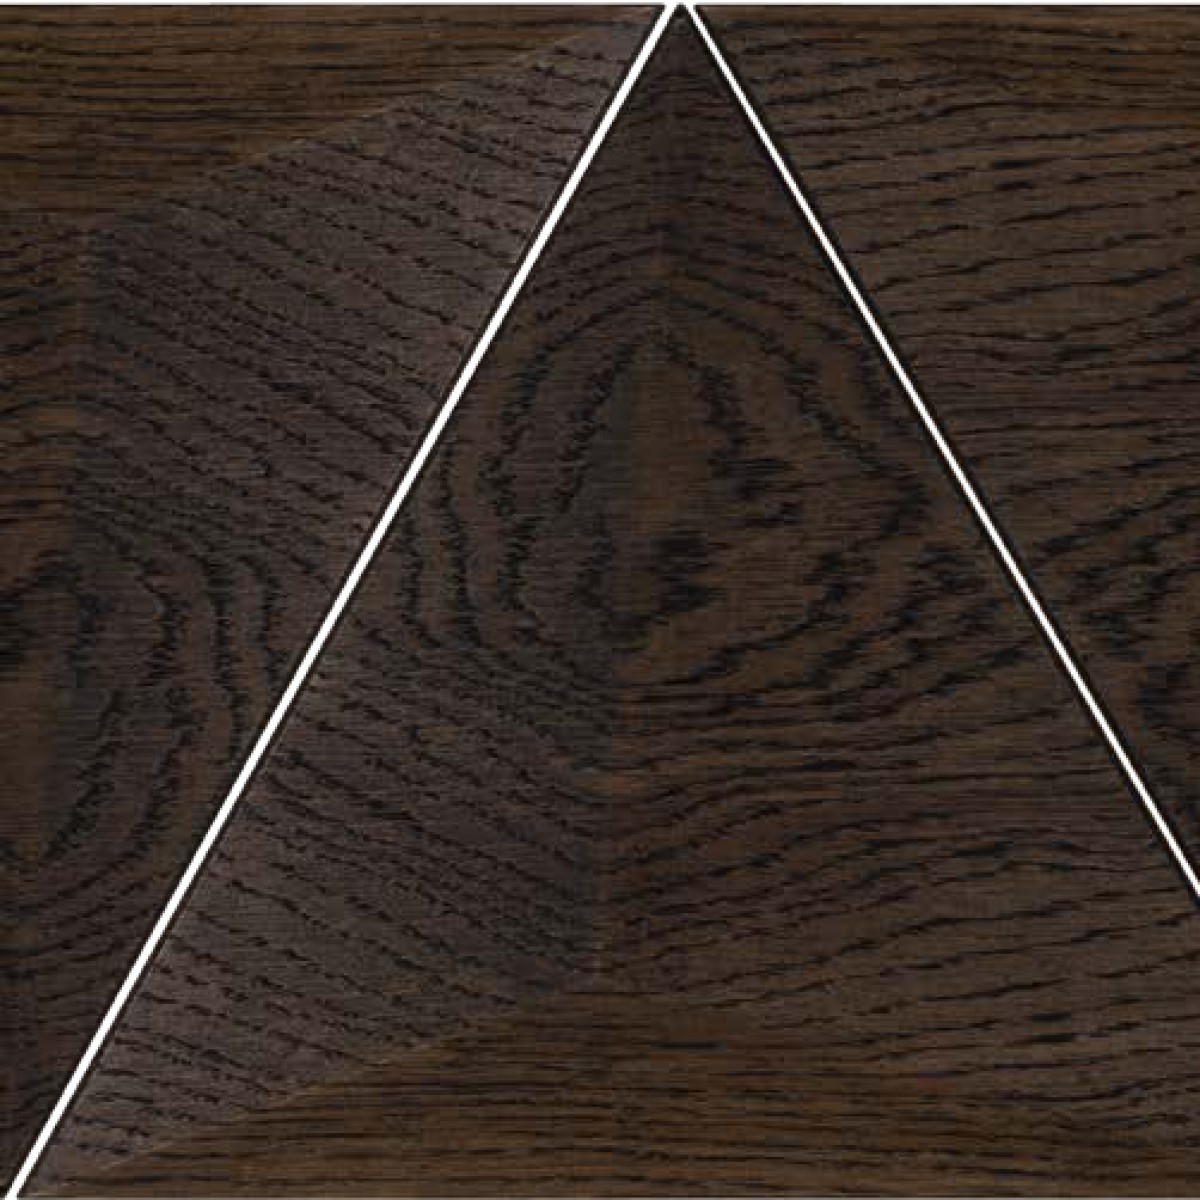 Panouri decorative din lemn FORM AT WOOD FRM-F03, material: